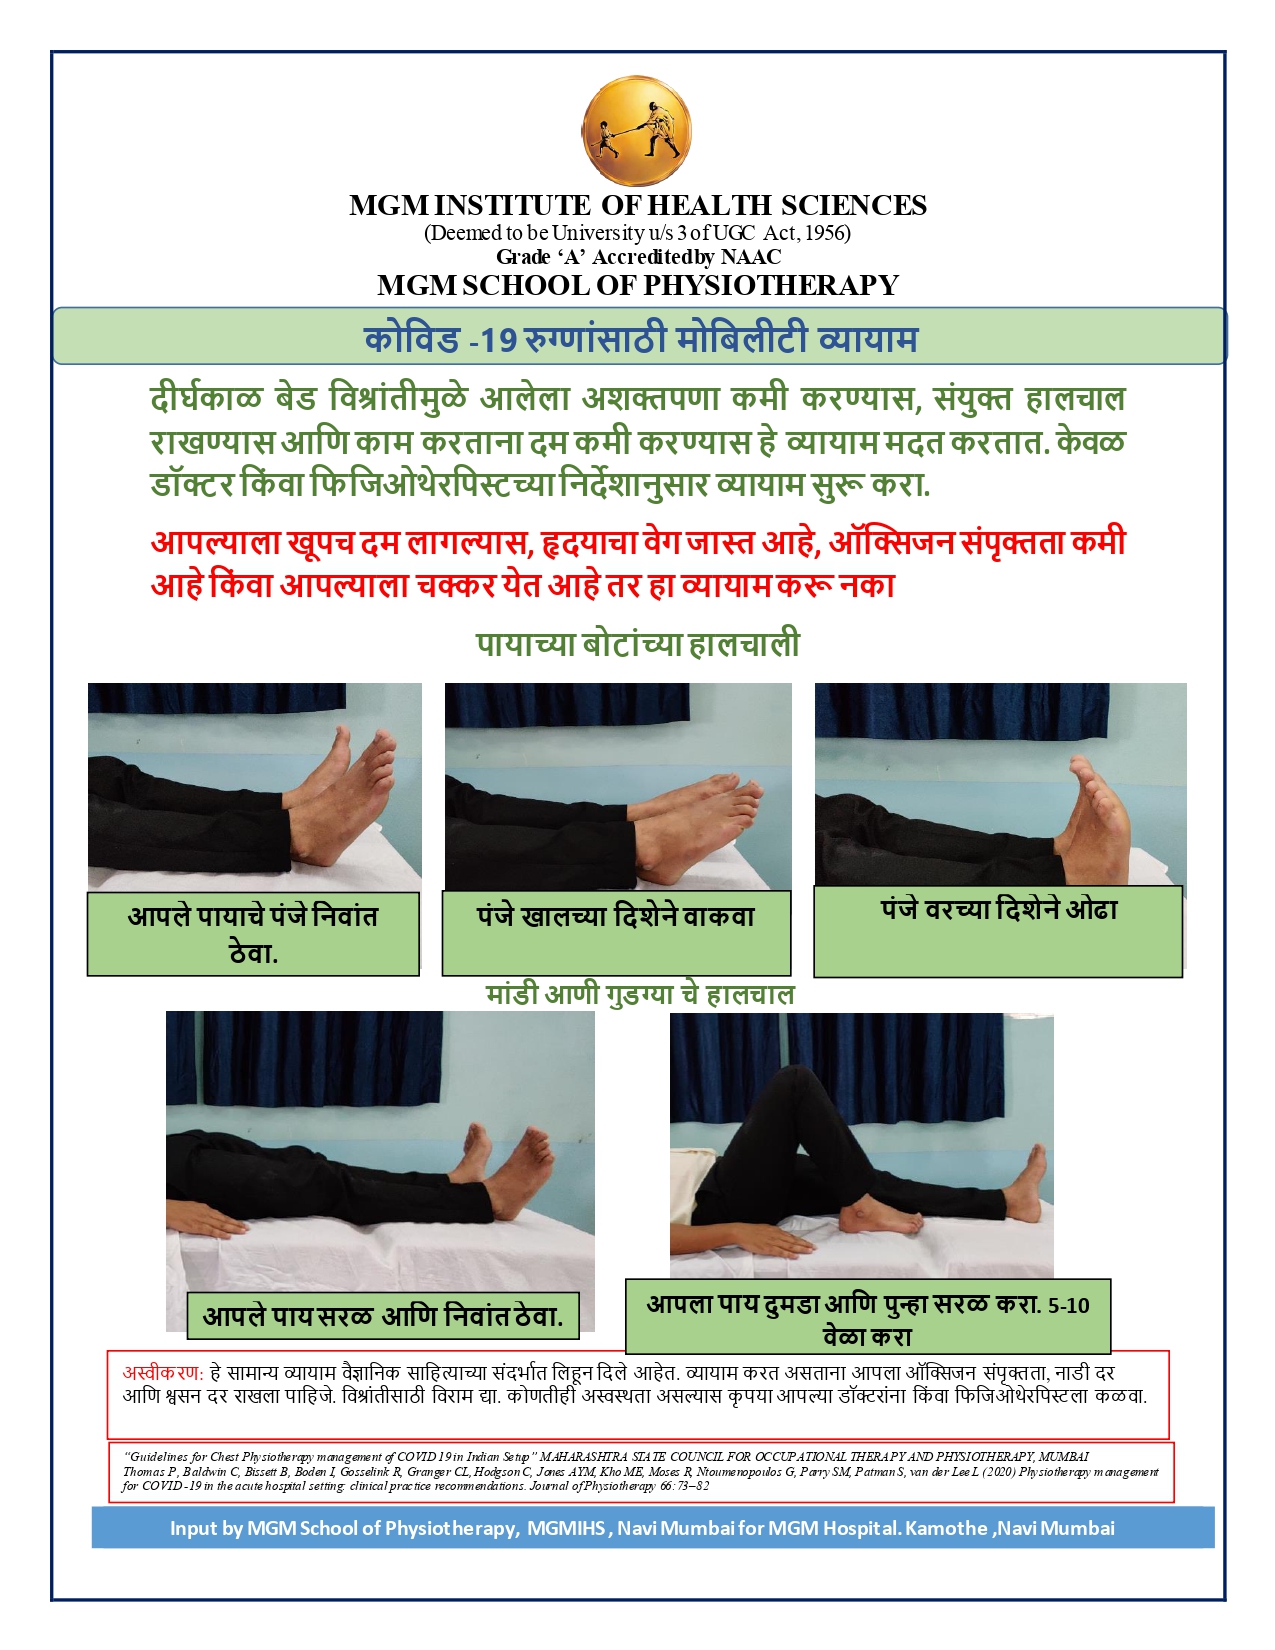 Mobility Exercise for COVID 19 Patients (Marathi)